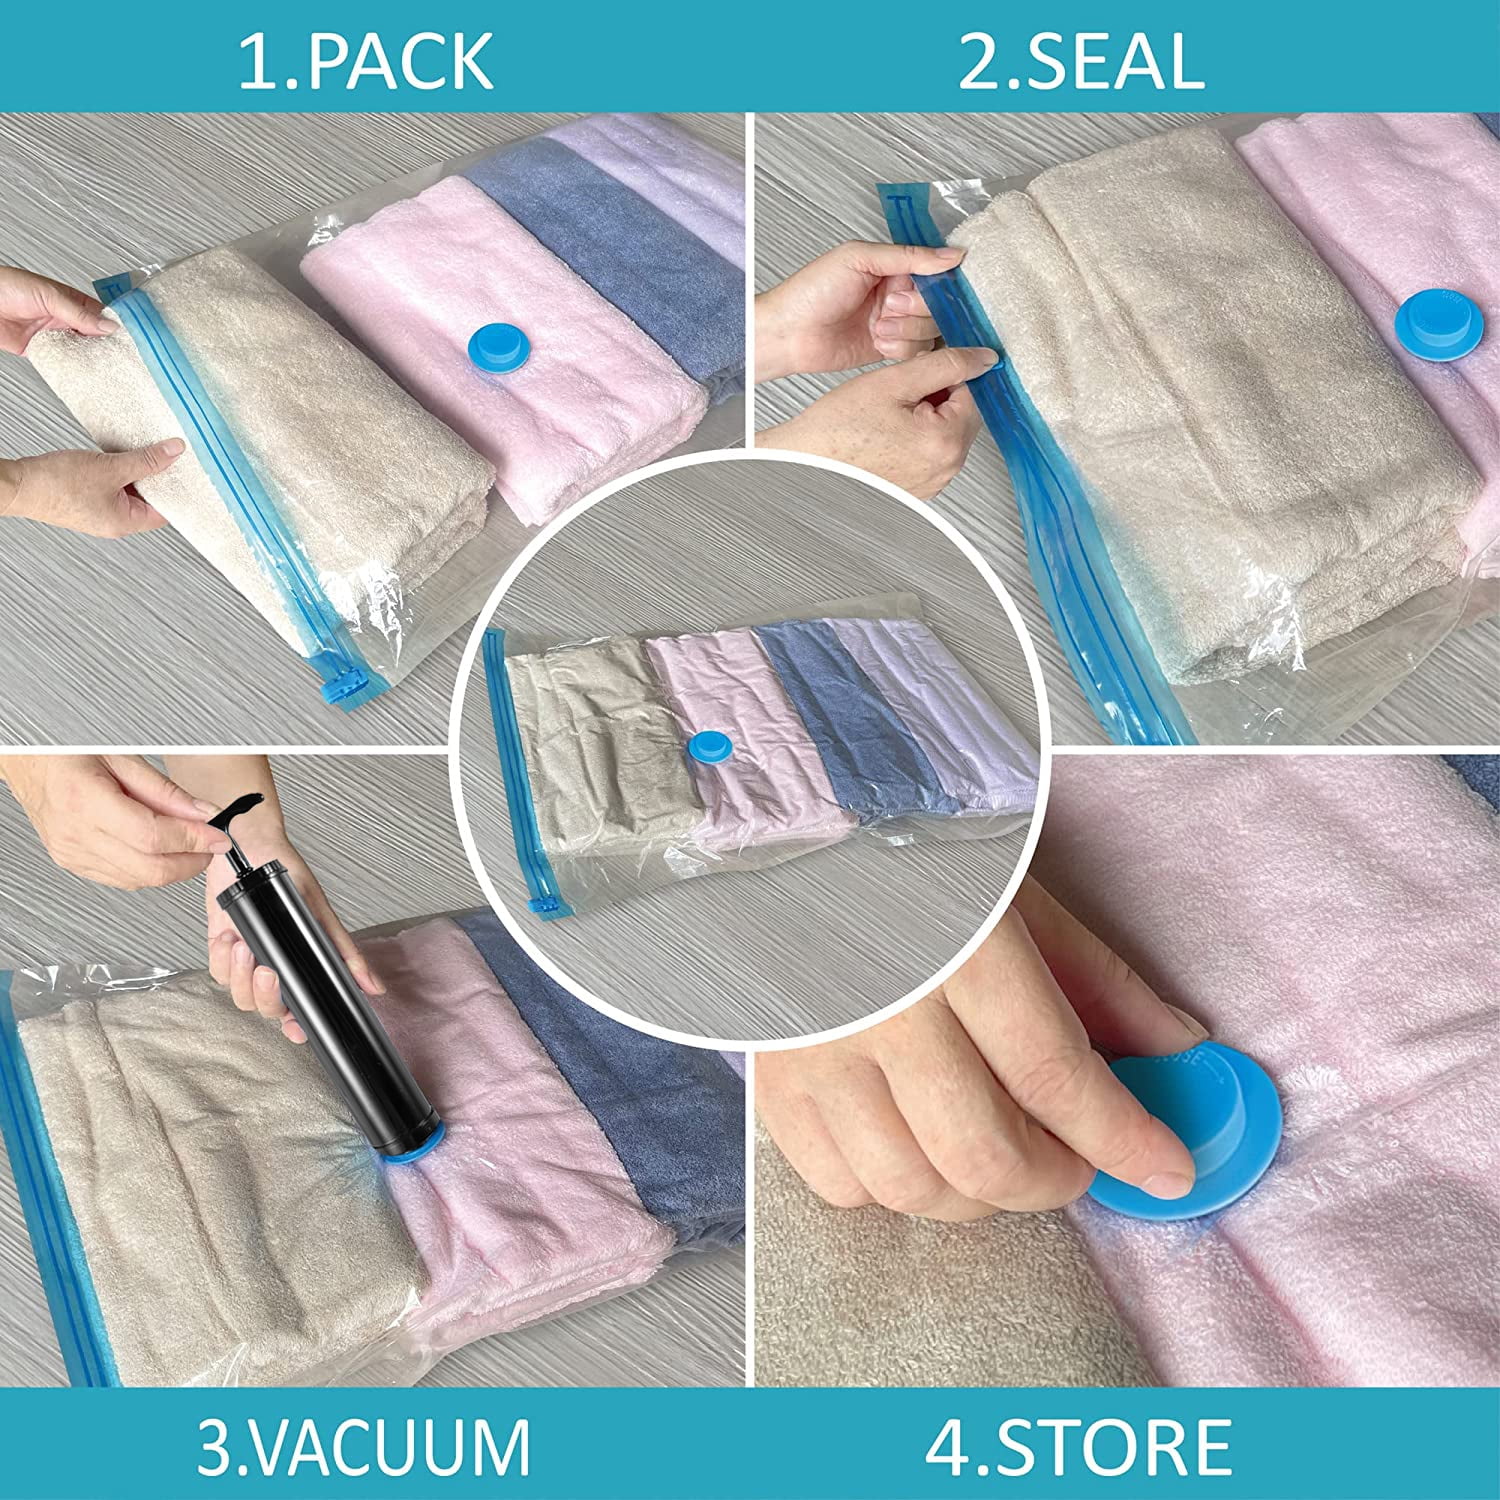 ANSIO Vacuum Storage Packing Bag For Clothes Ideal For Clothes Blankets   Pack of 6 Medium 80cm x 60cm Pump Not Included  Amazonin Home   Kitchen